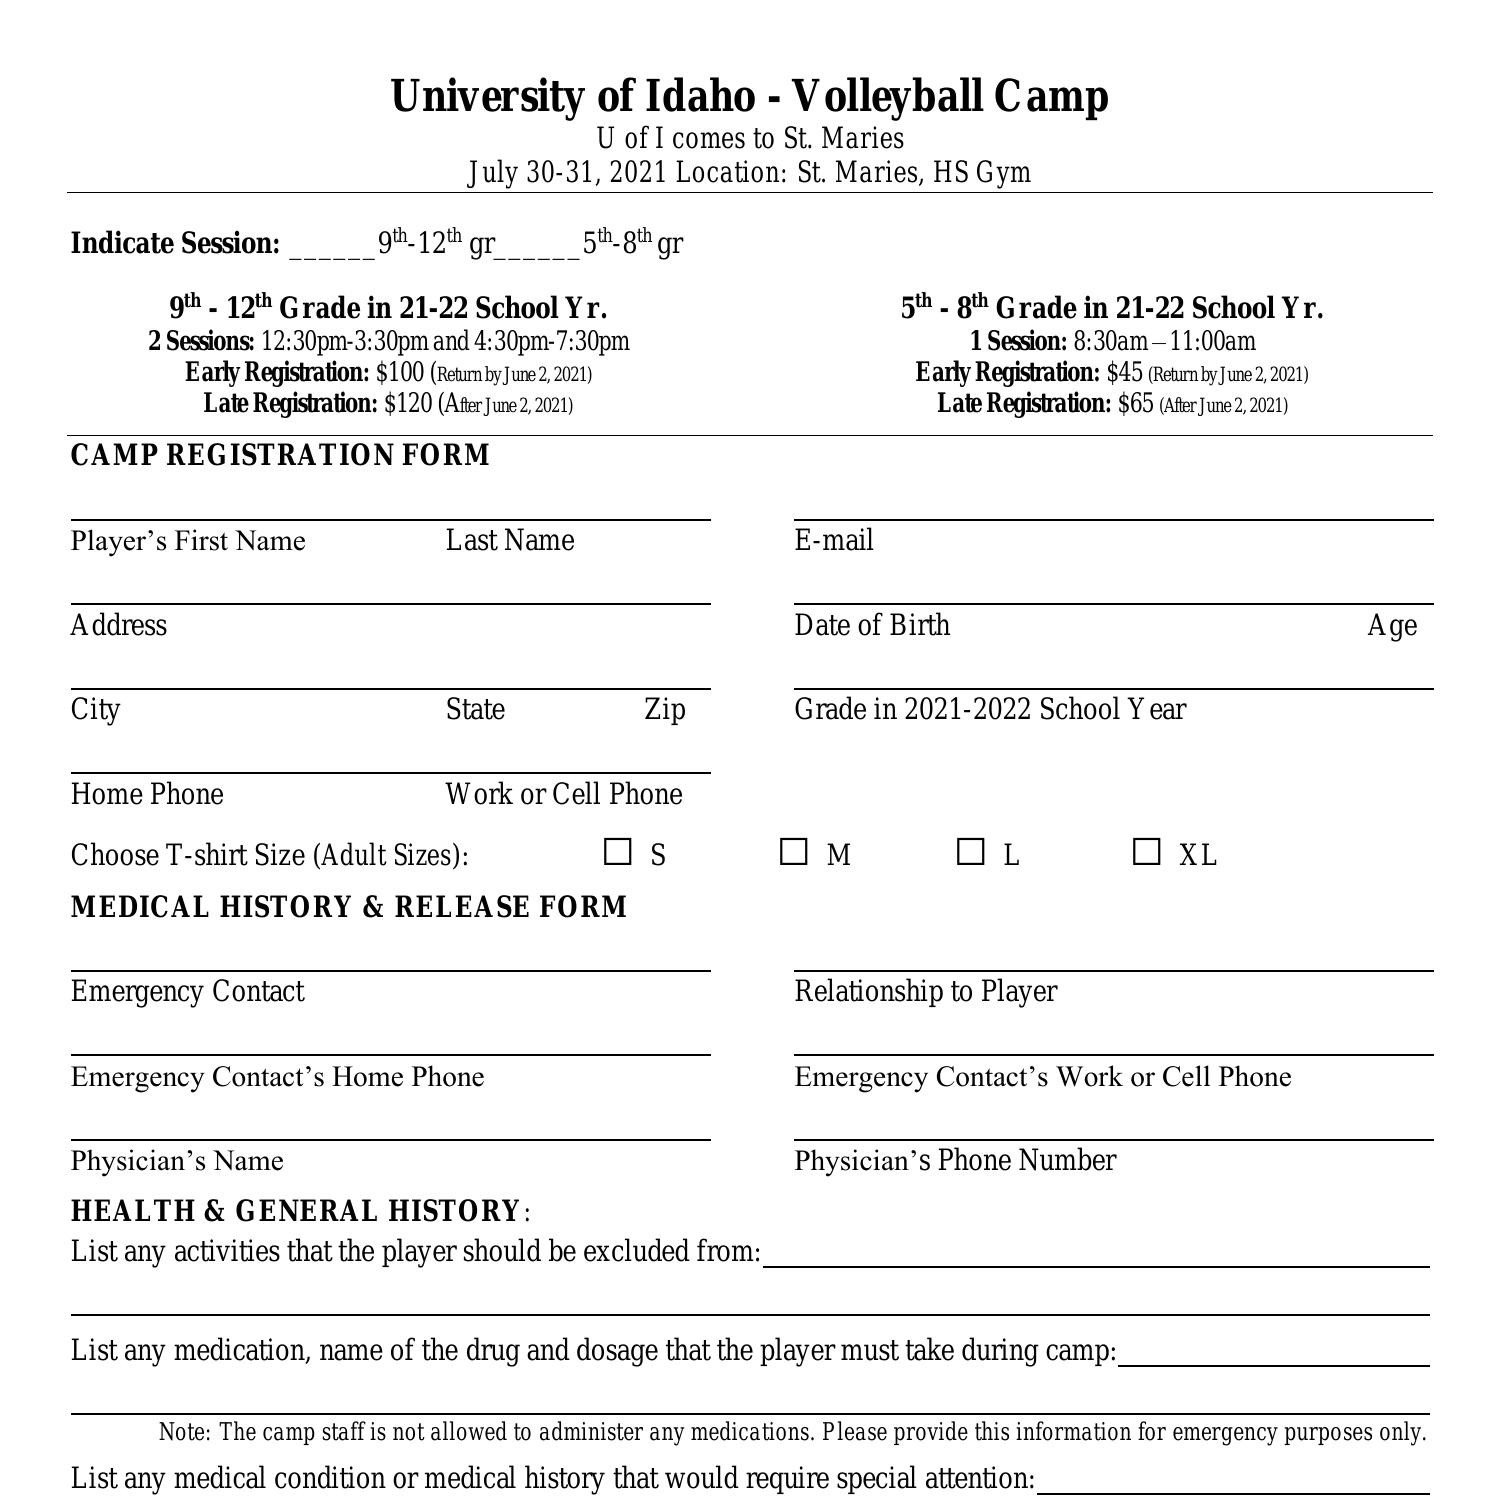 U of I in St. Maries Summer Volleyball Camp Registration Form 2021